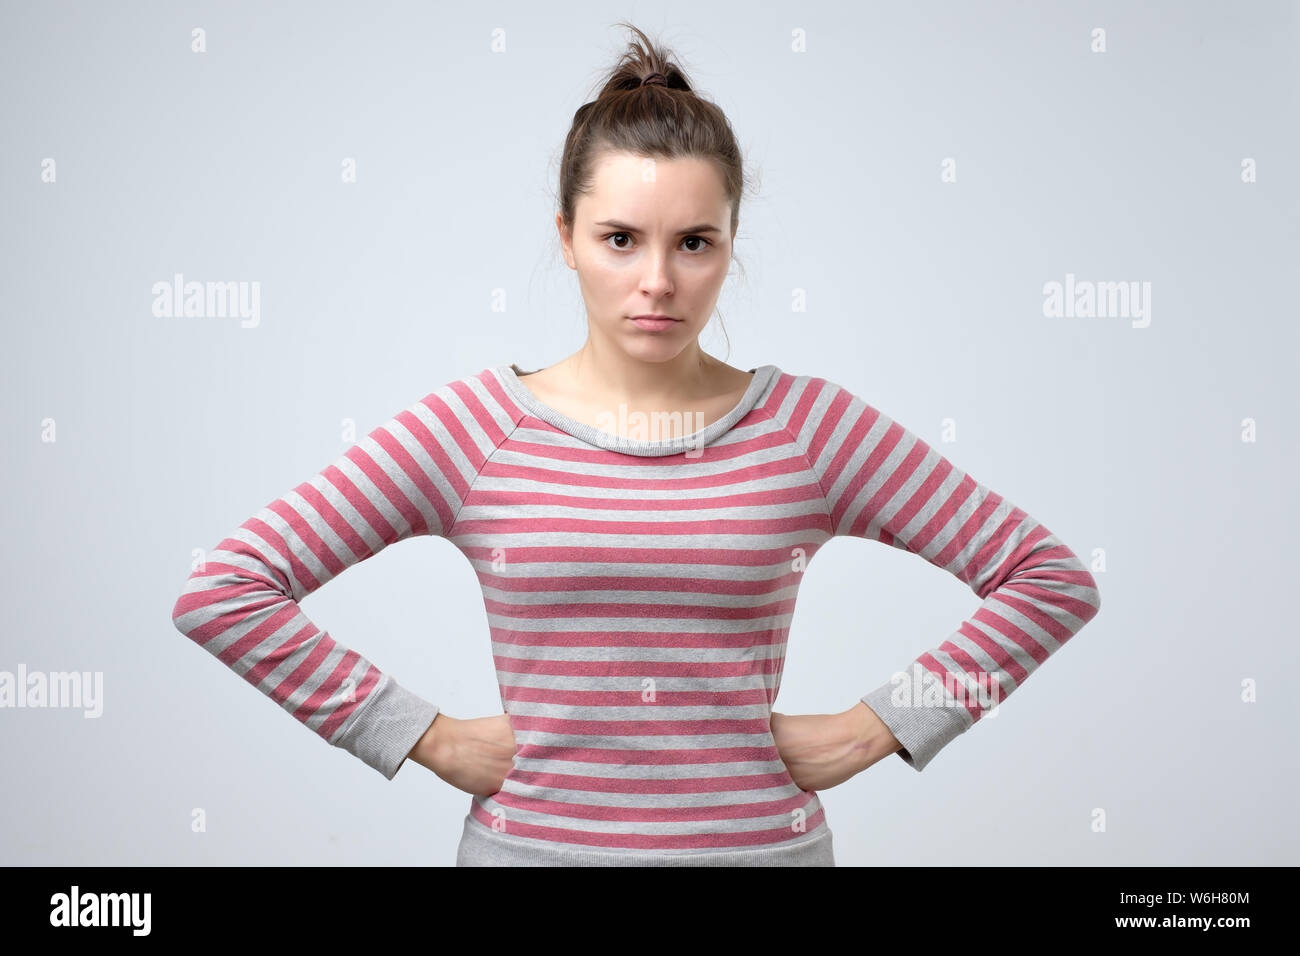 Displeased angry teenager holding hands on hips, frowning Stock Photo